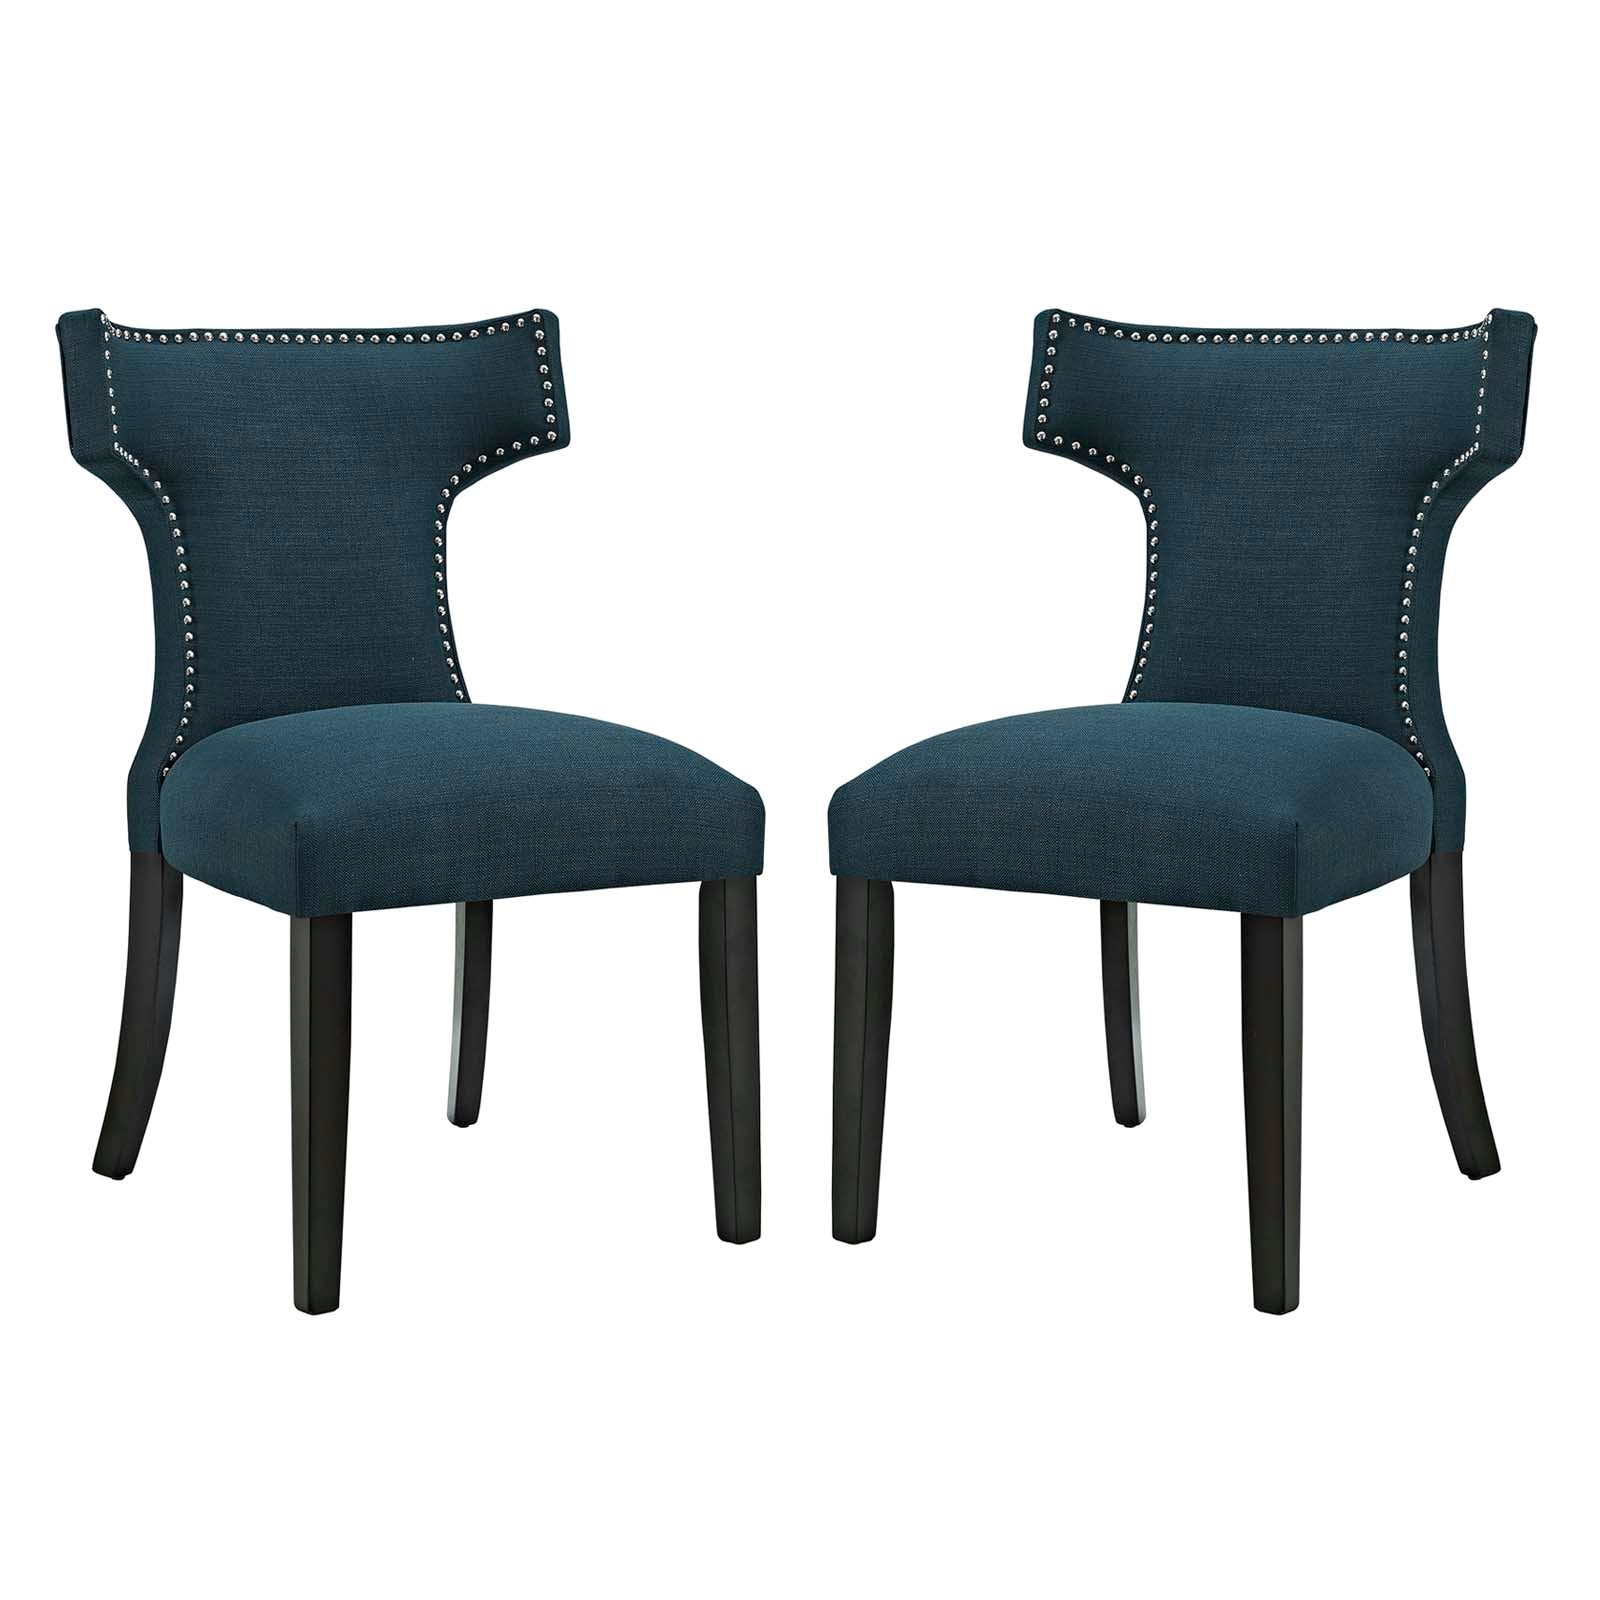 Mid - Century Modern Curve Dining Side Chair Set OF 2 - Kitchen Table Set